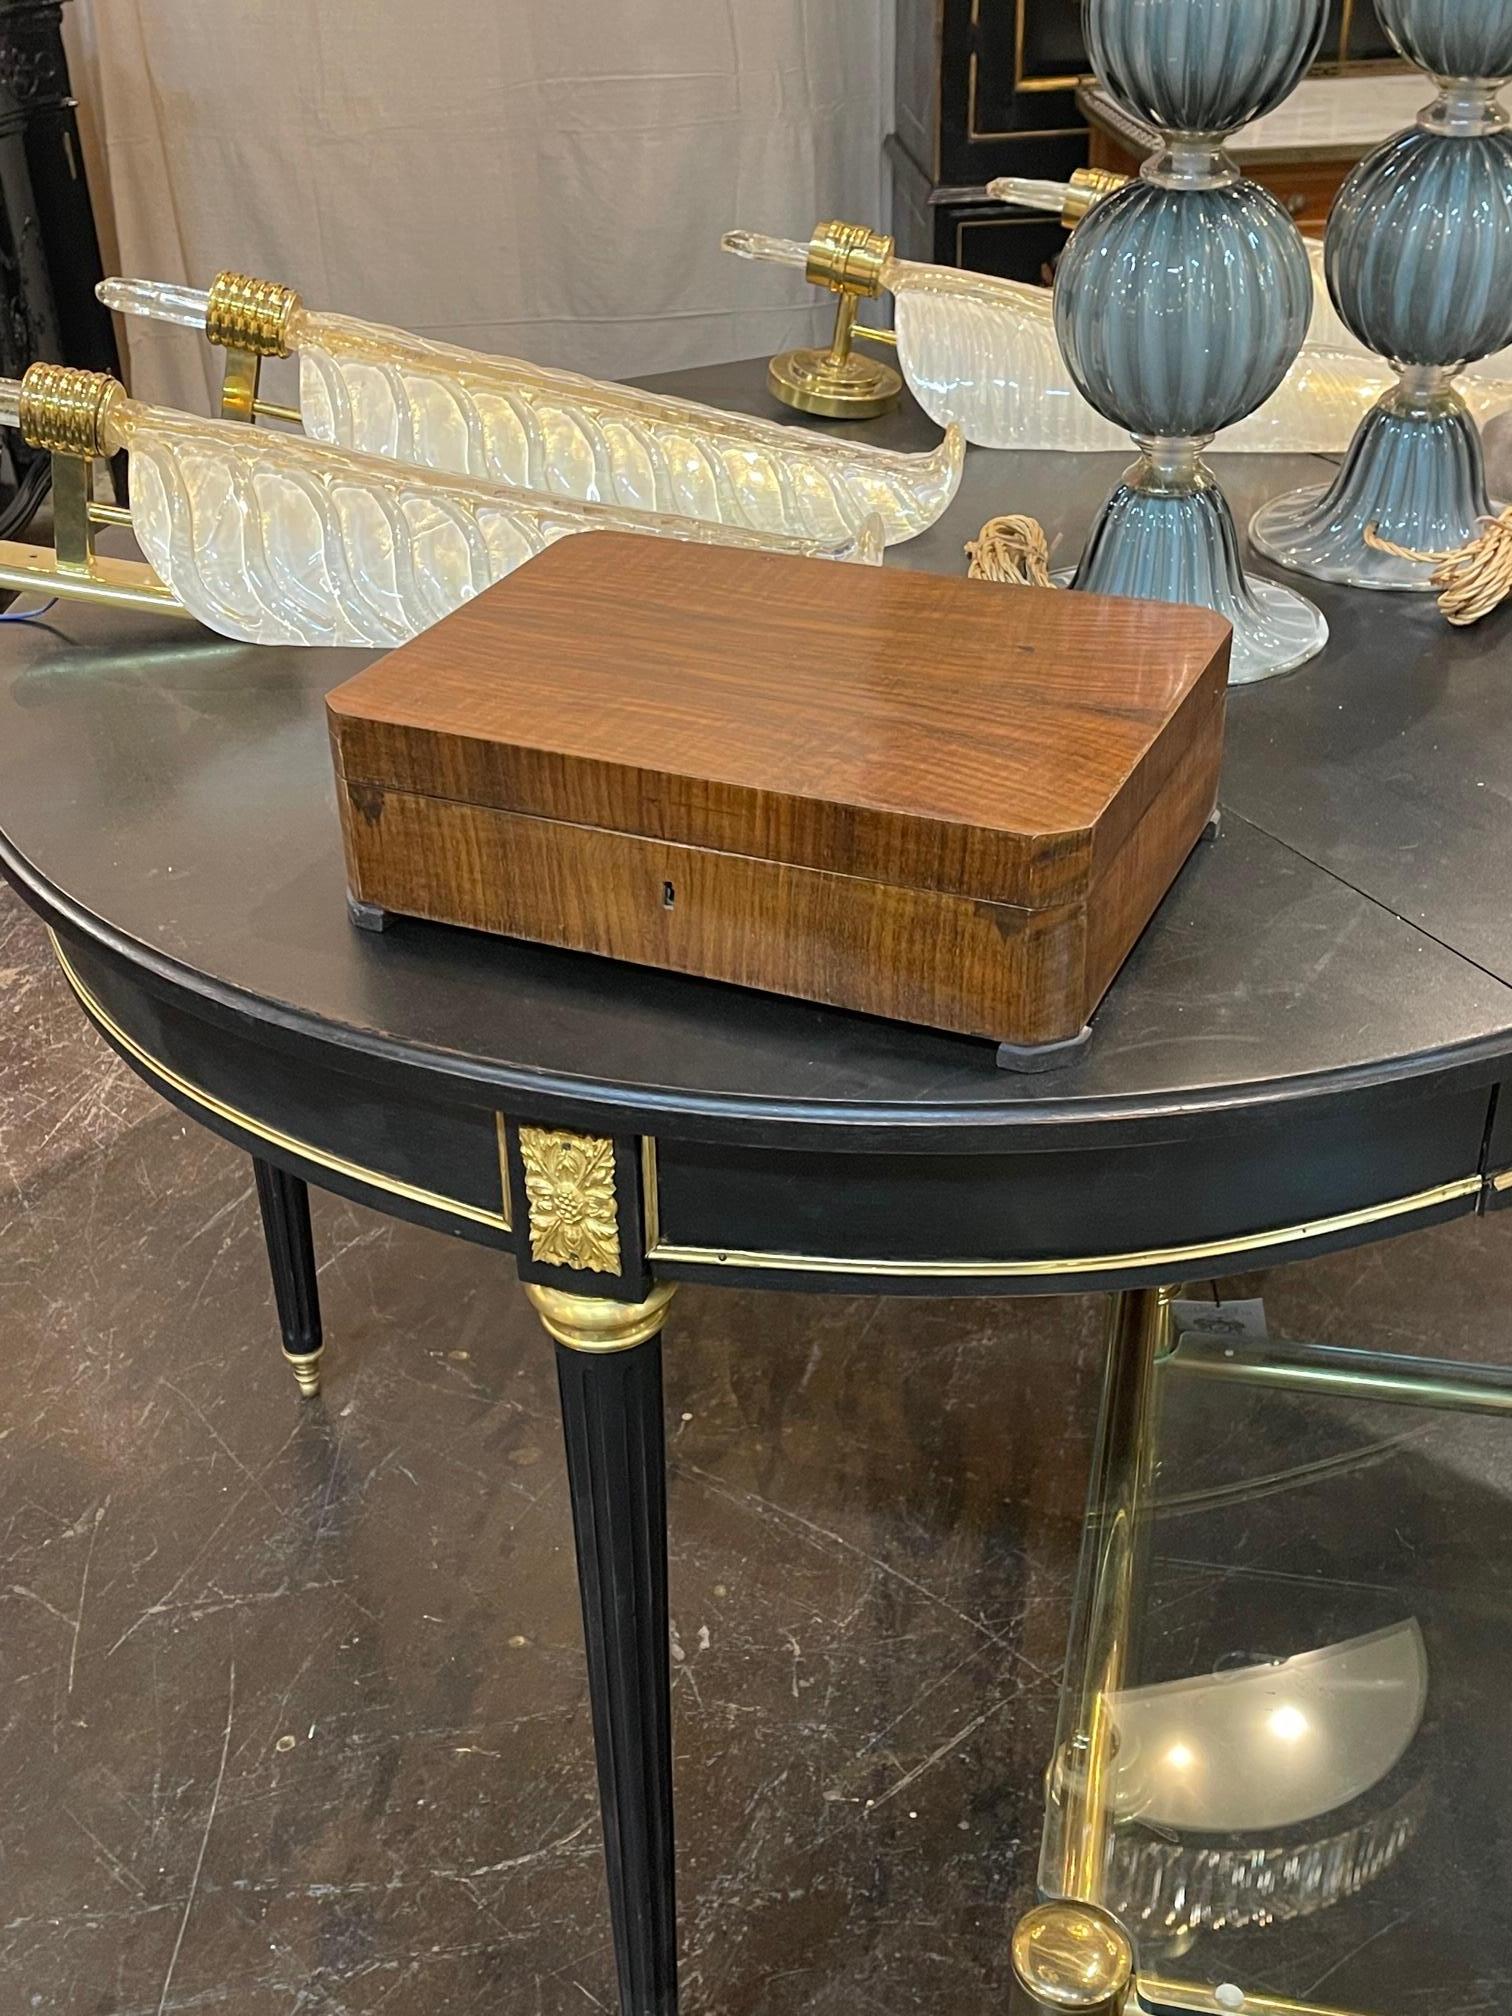 Handsome 19th century German Biedermeier Mahogany box with a very fine finish. This would piece would make a very special gift!